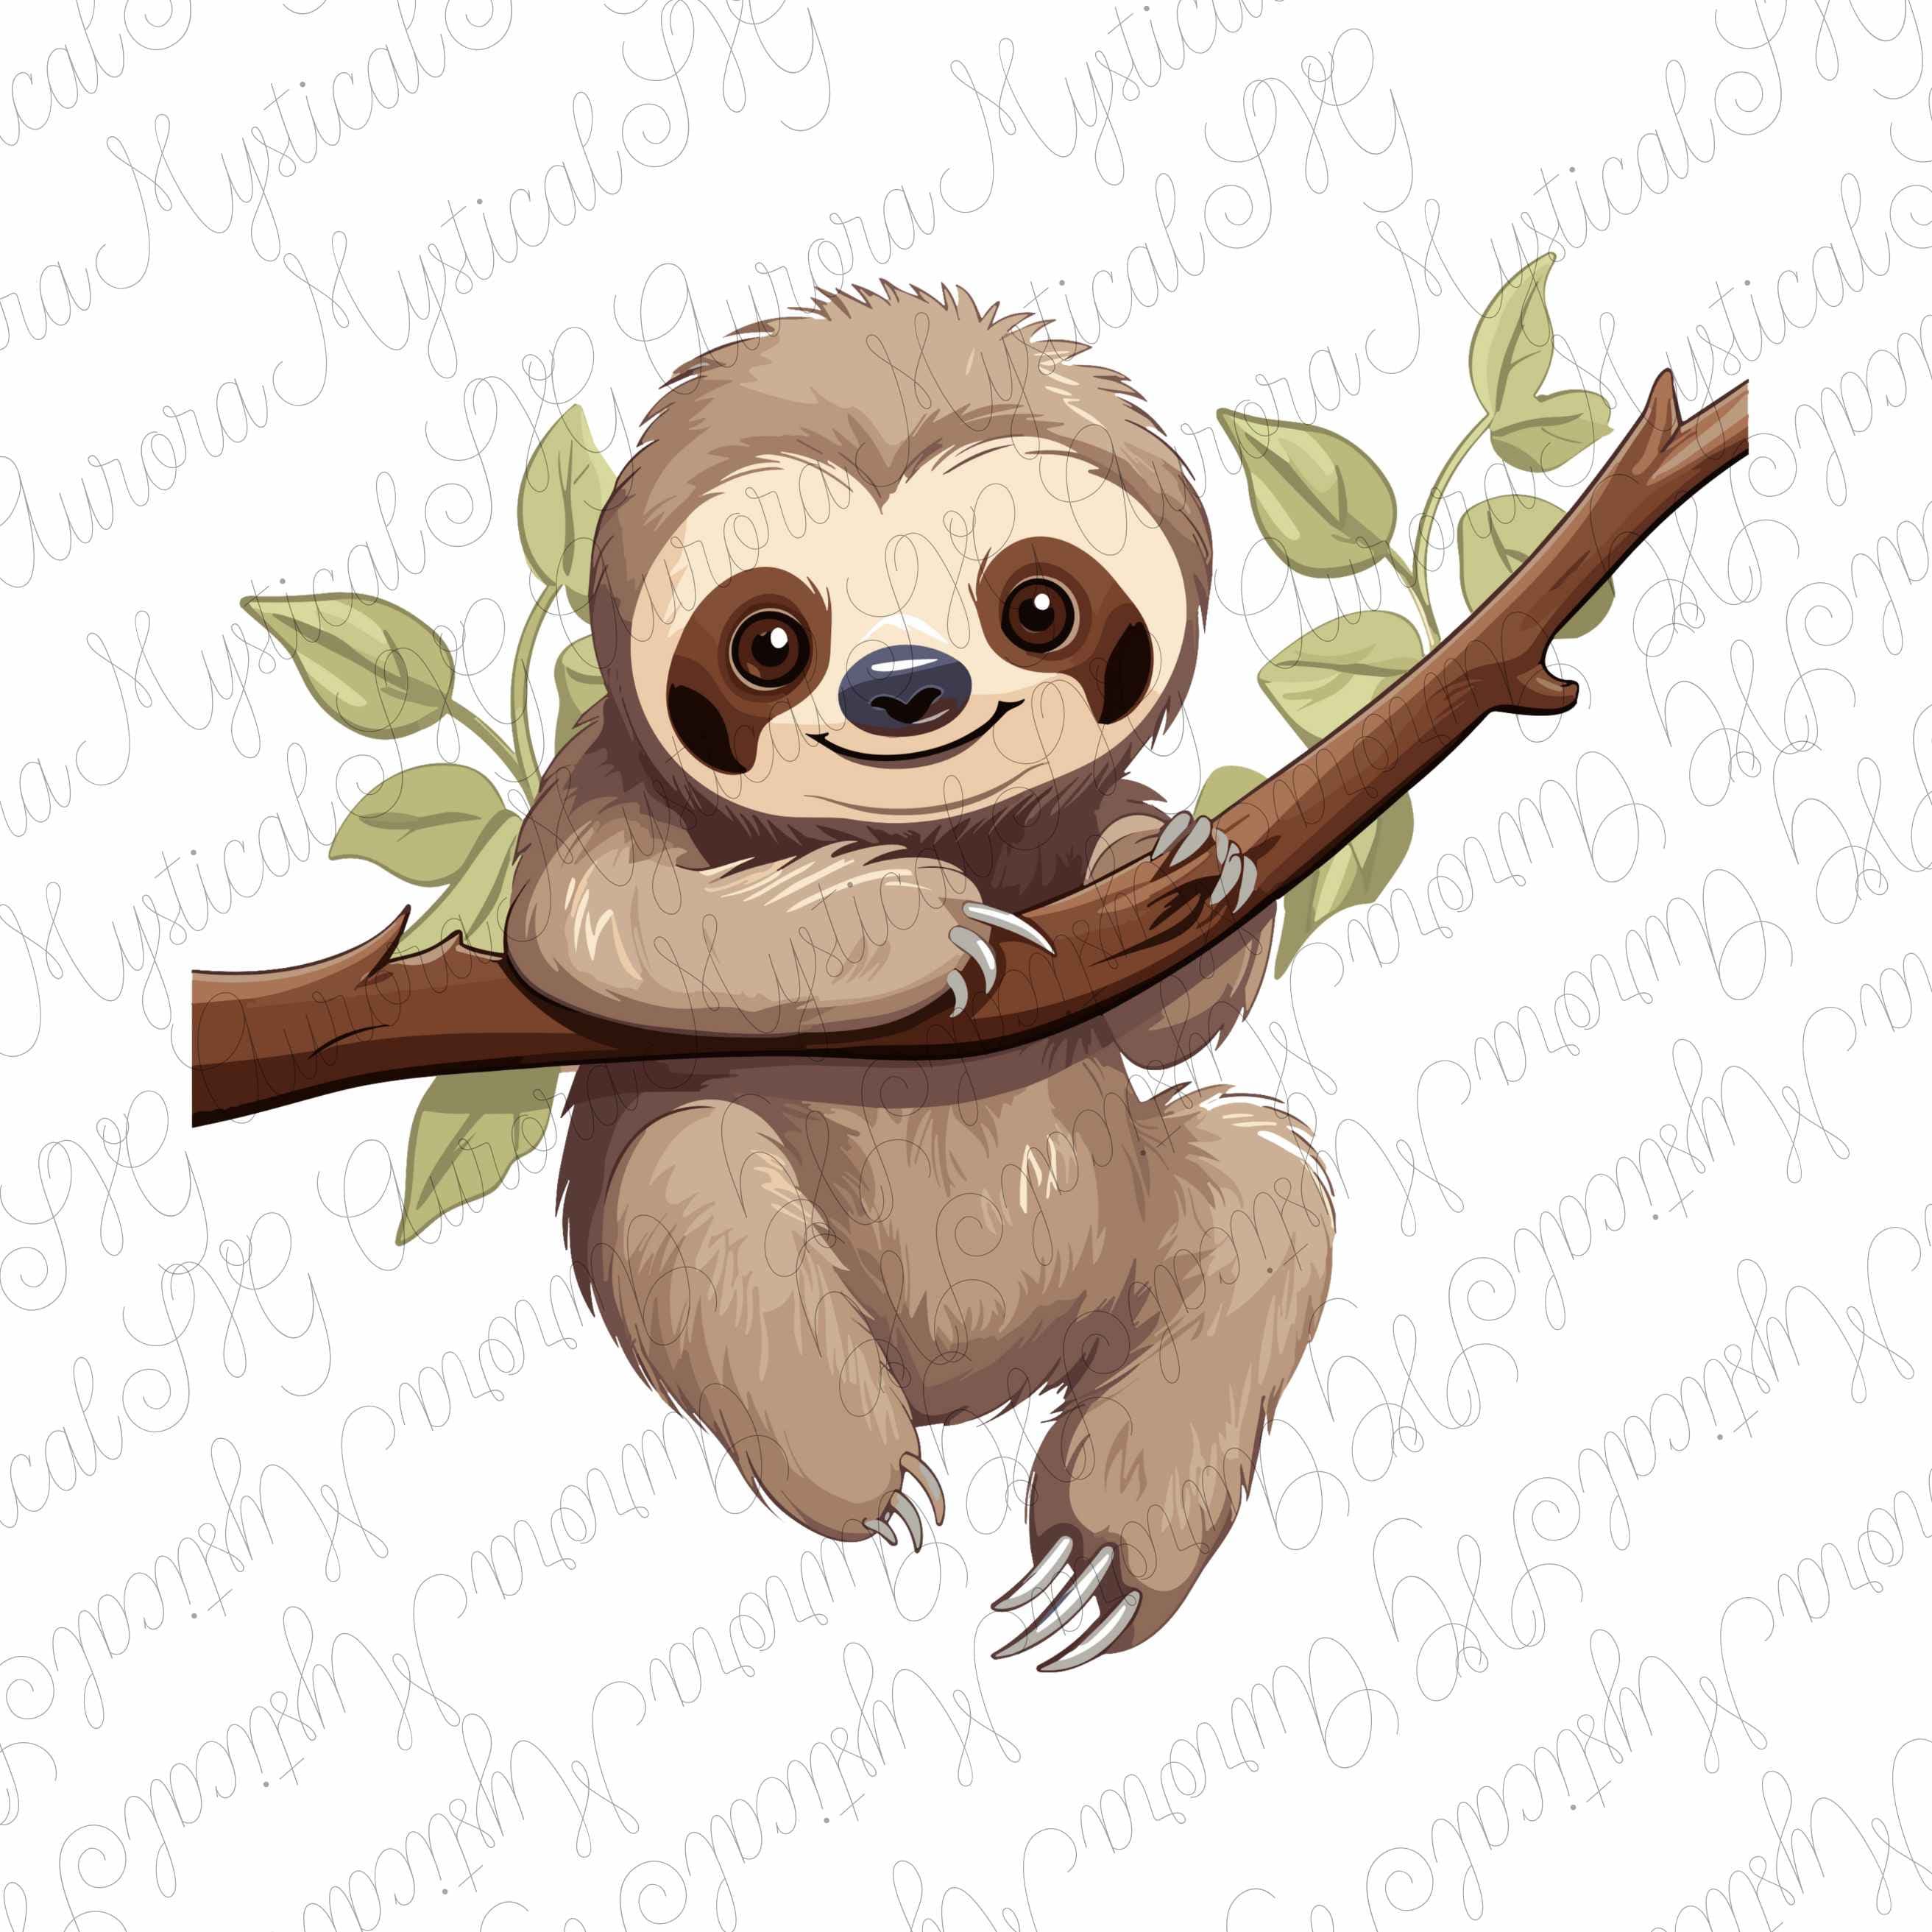 Happy Birthday Sloth with Cupcake Clipart Digital Download SVG PNG JPG – Sniggle  Sloth